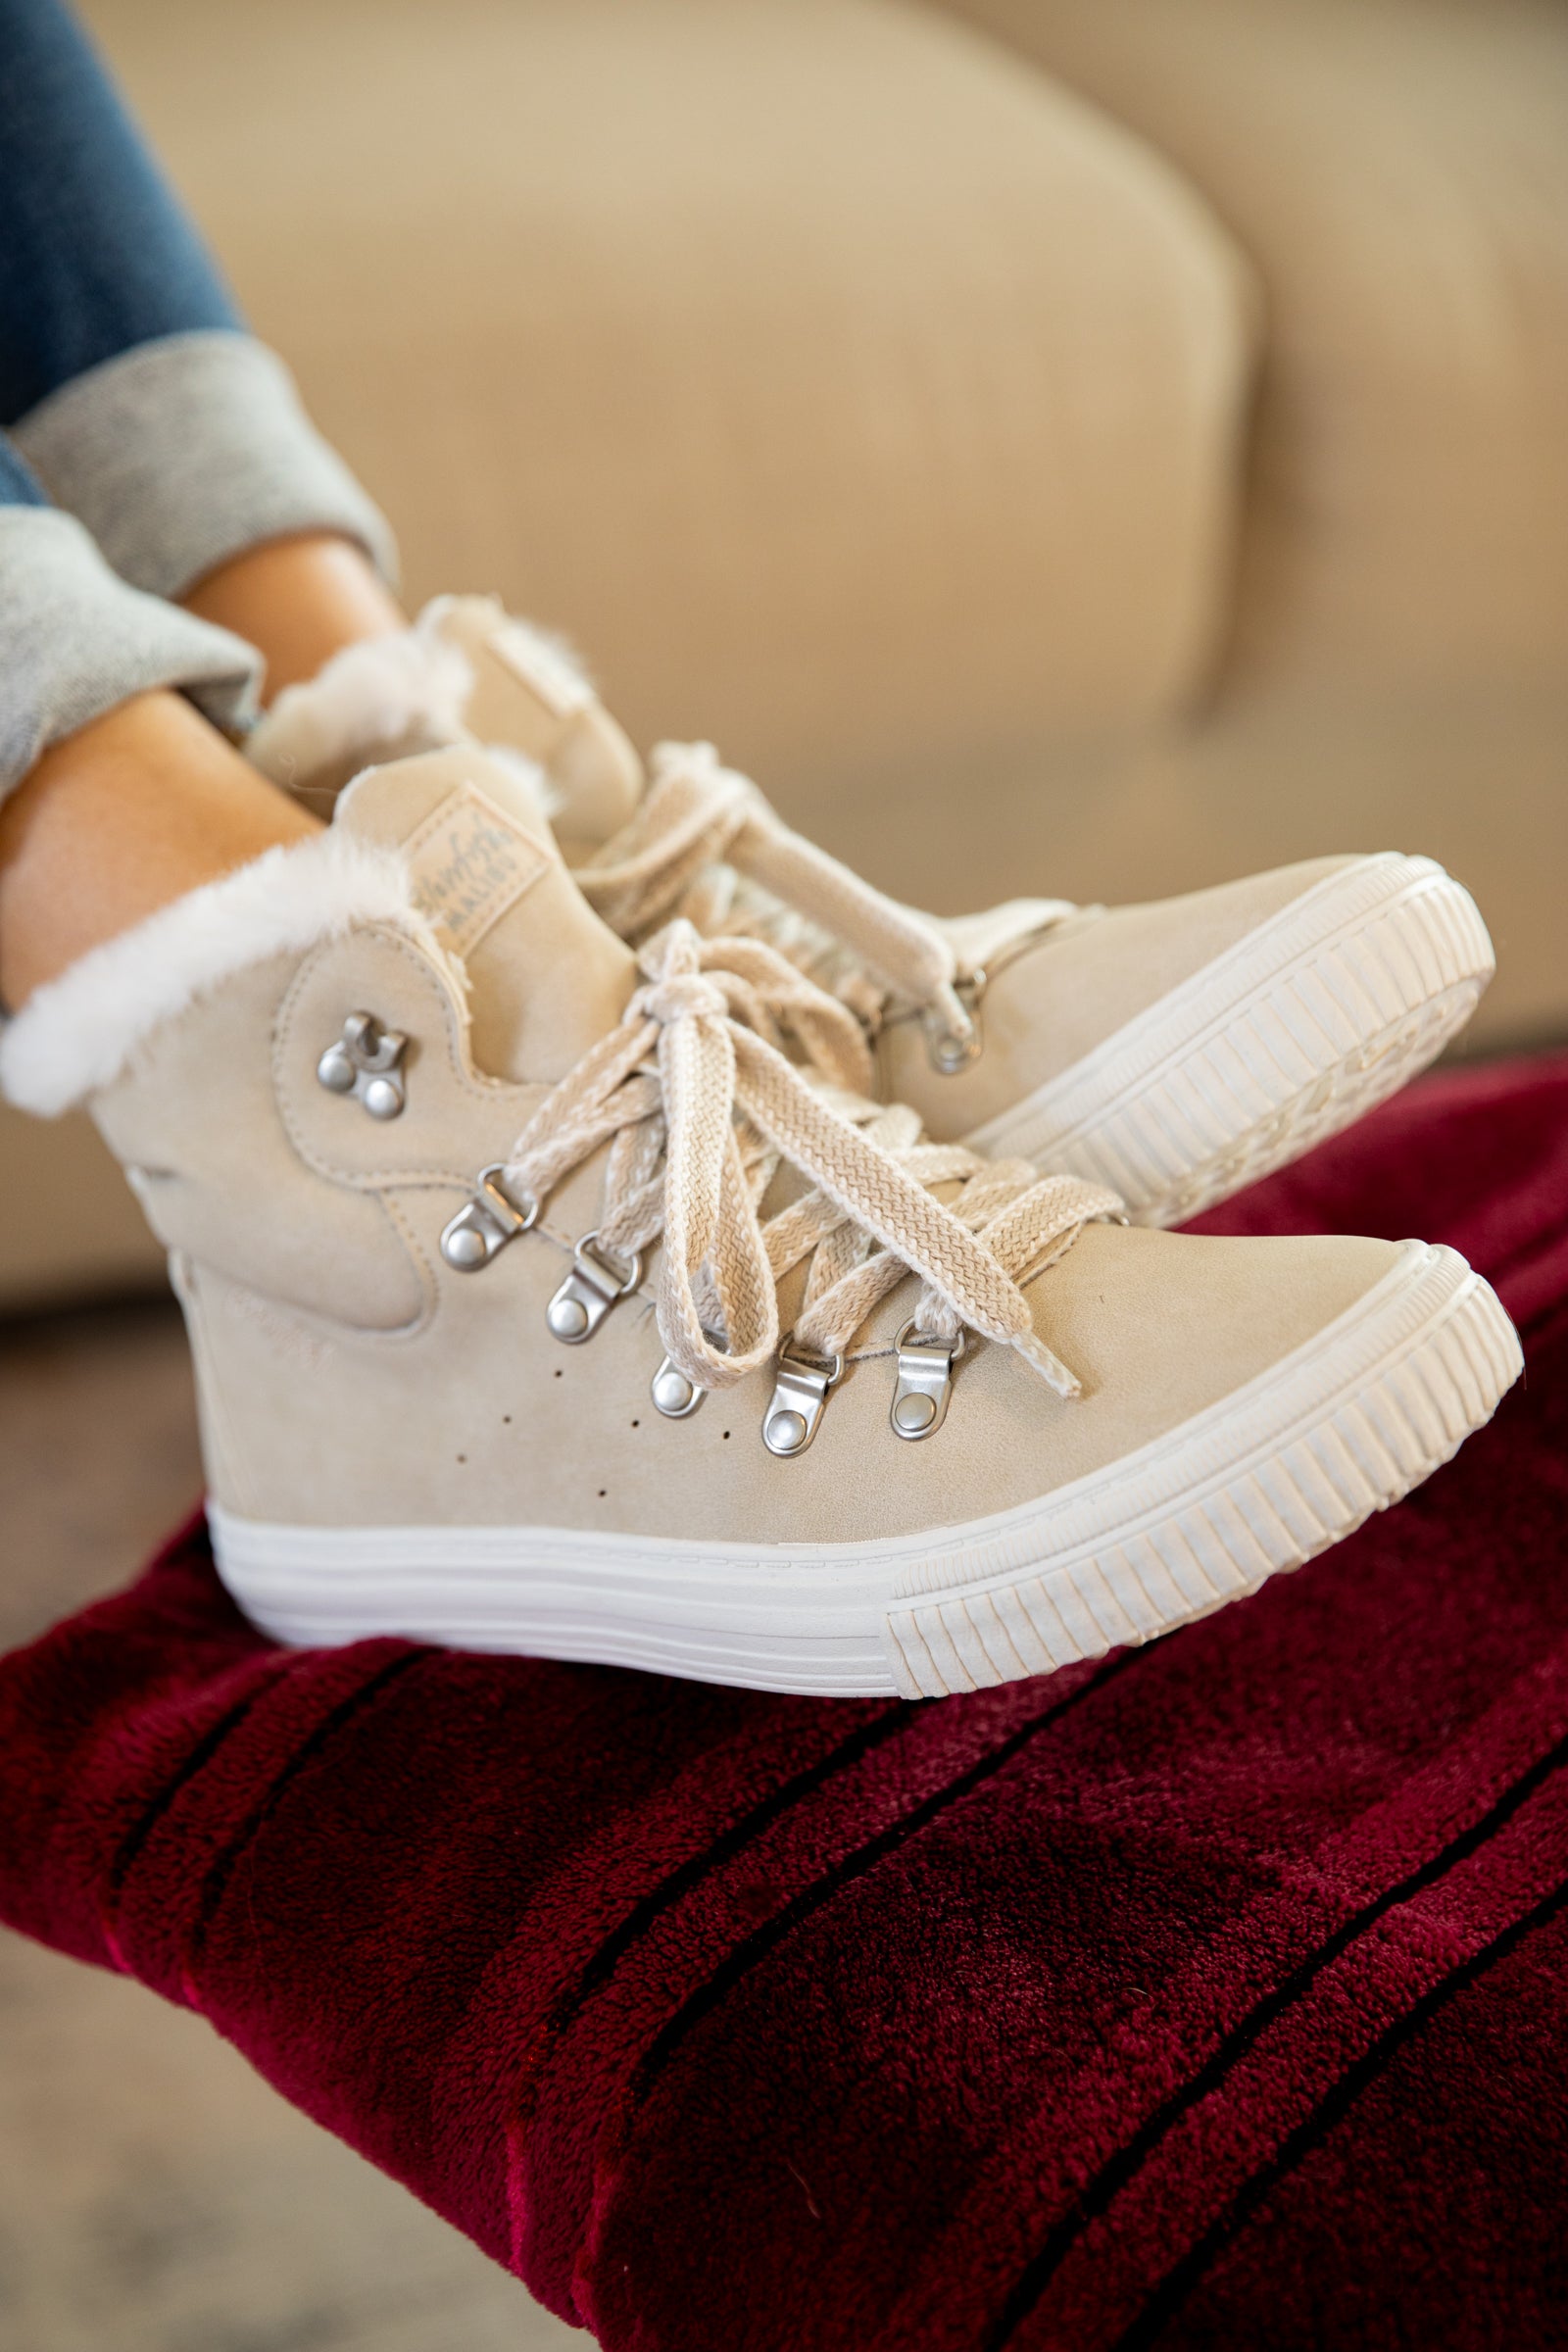 Top Sneakers With Faux Fur Trim · Filly Flair